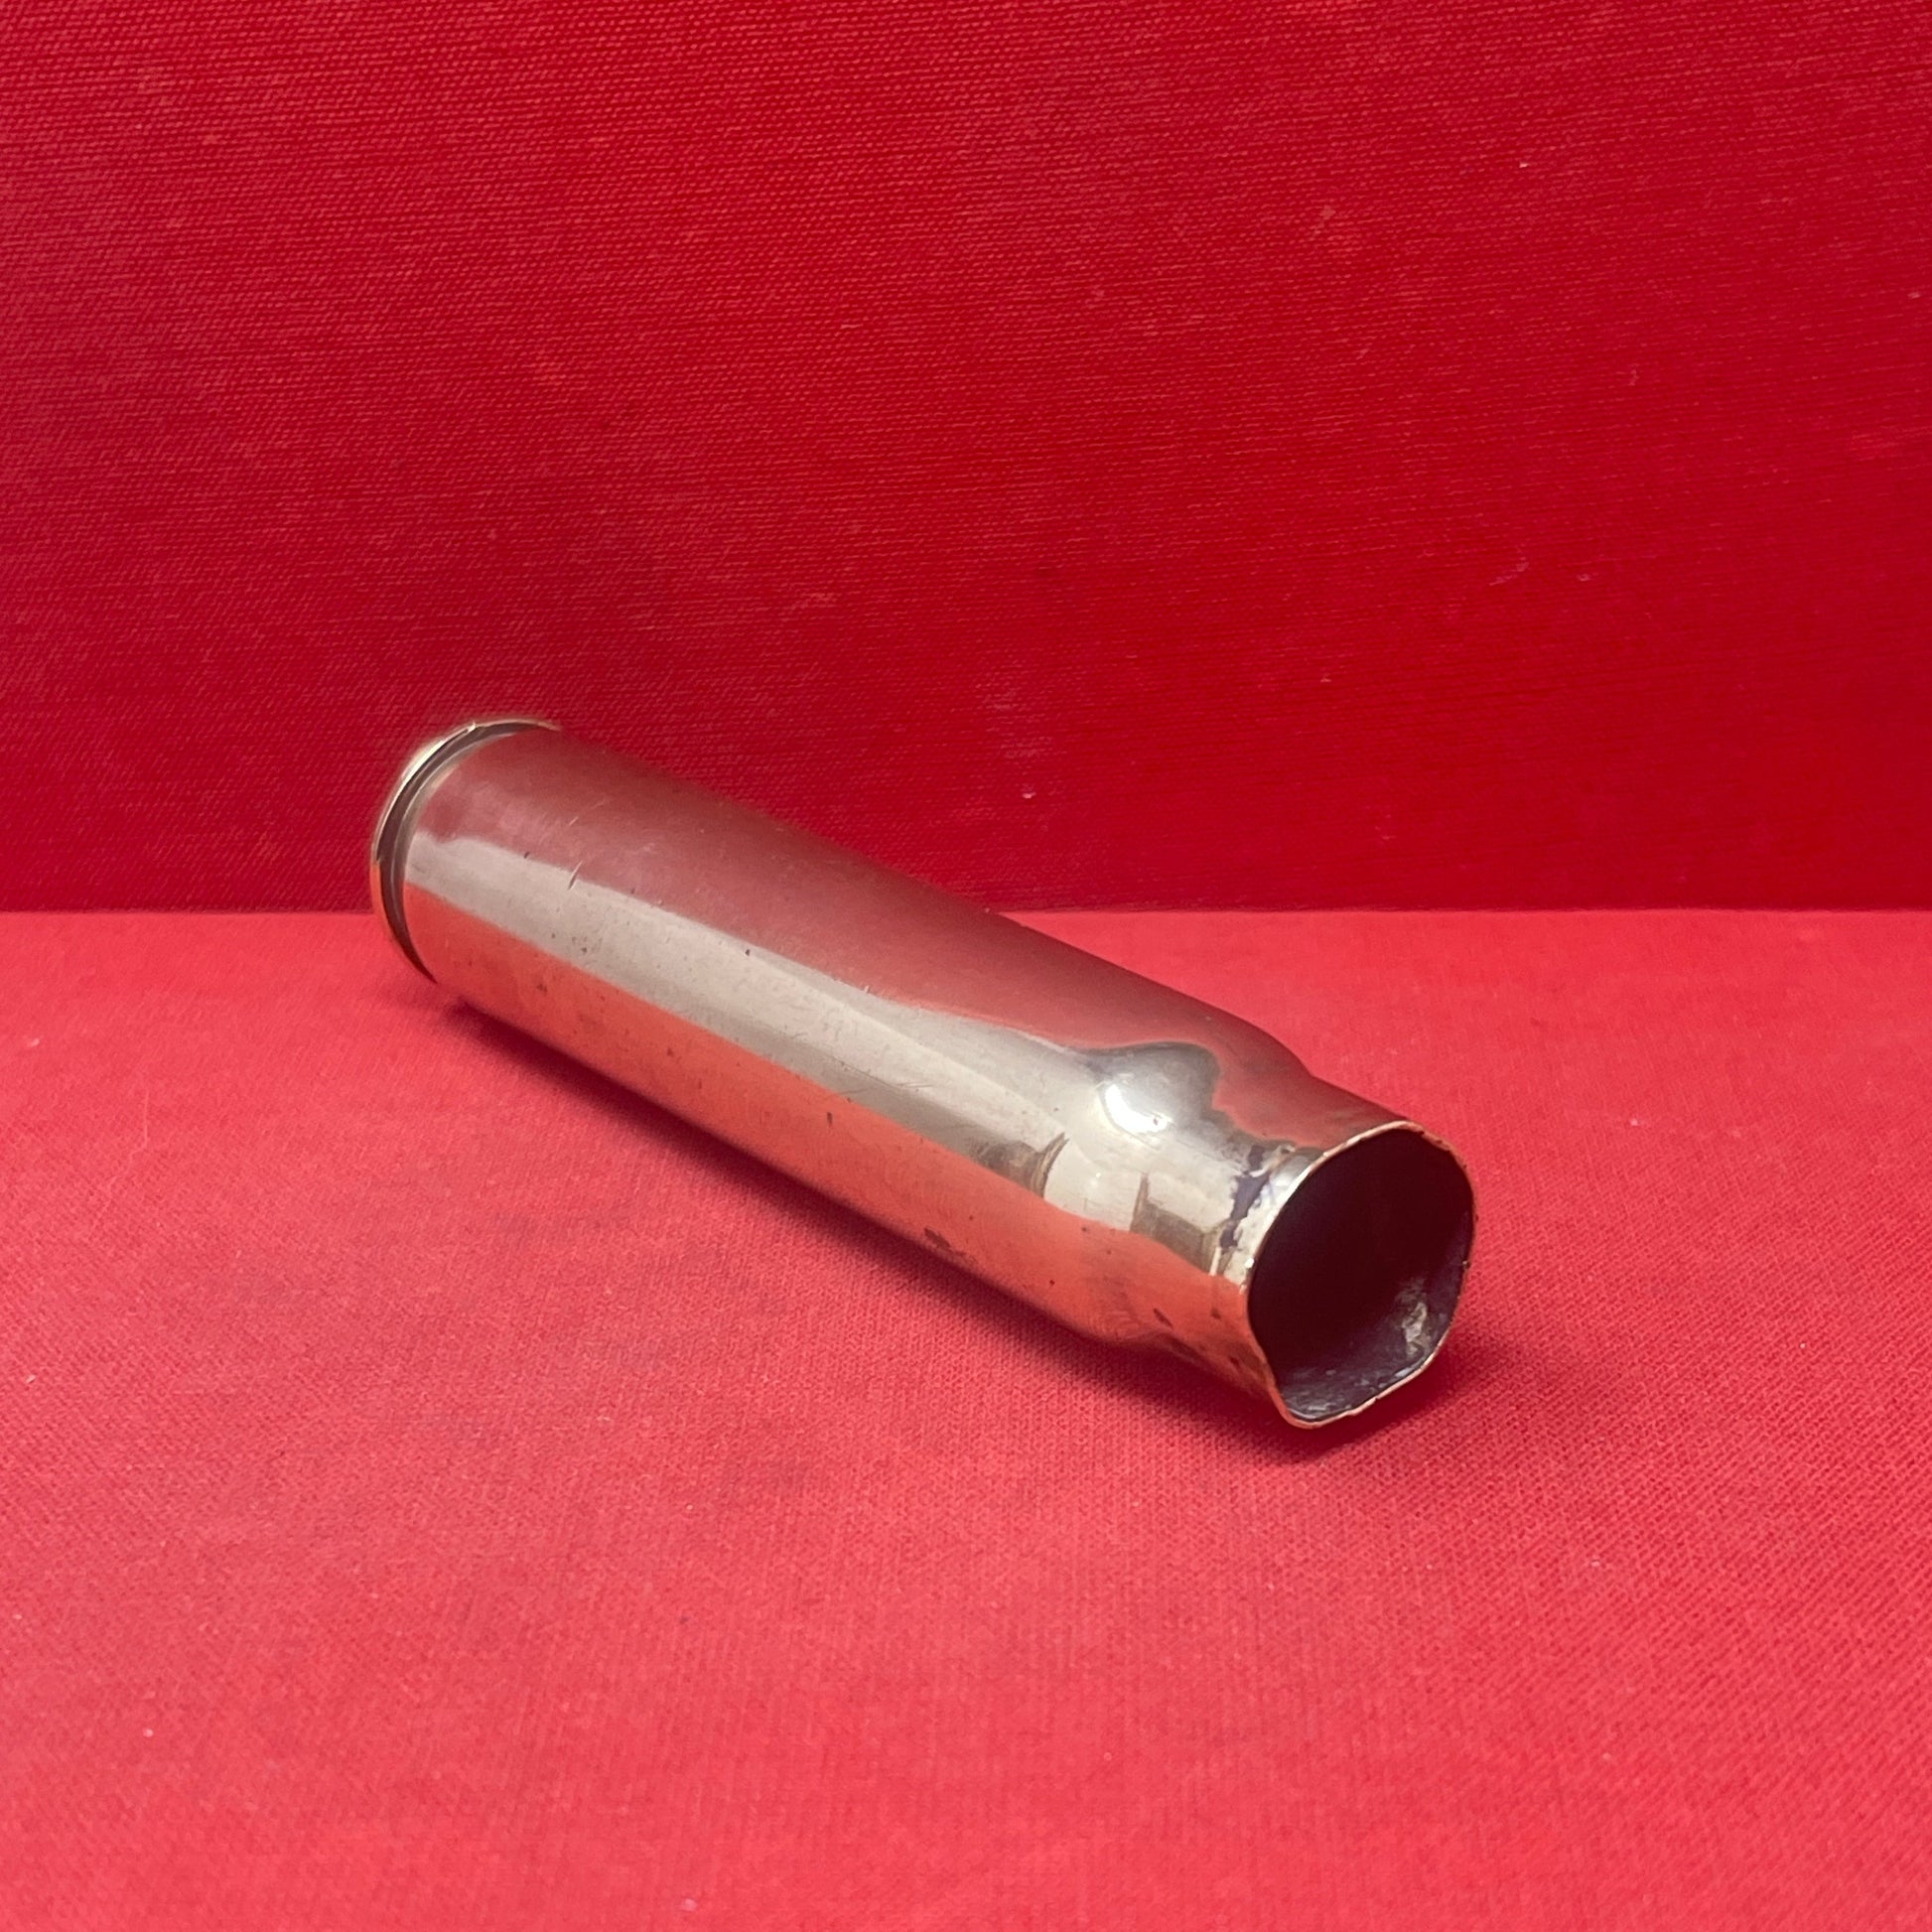 This particular 20mm casing was manufactured in&nbsp; ST - Royal Ordnance Factory, Steeton